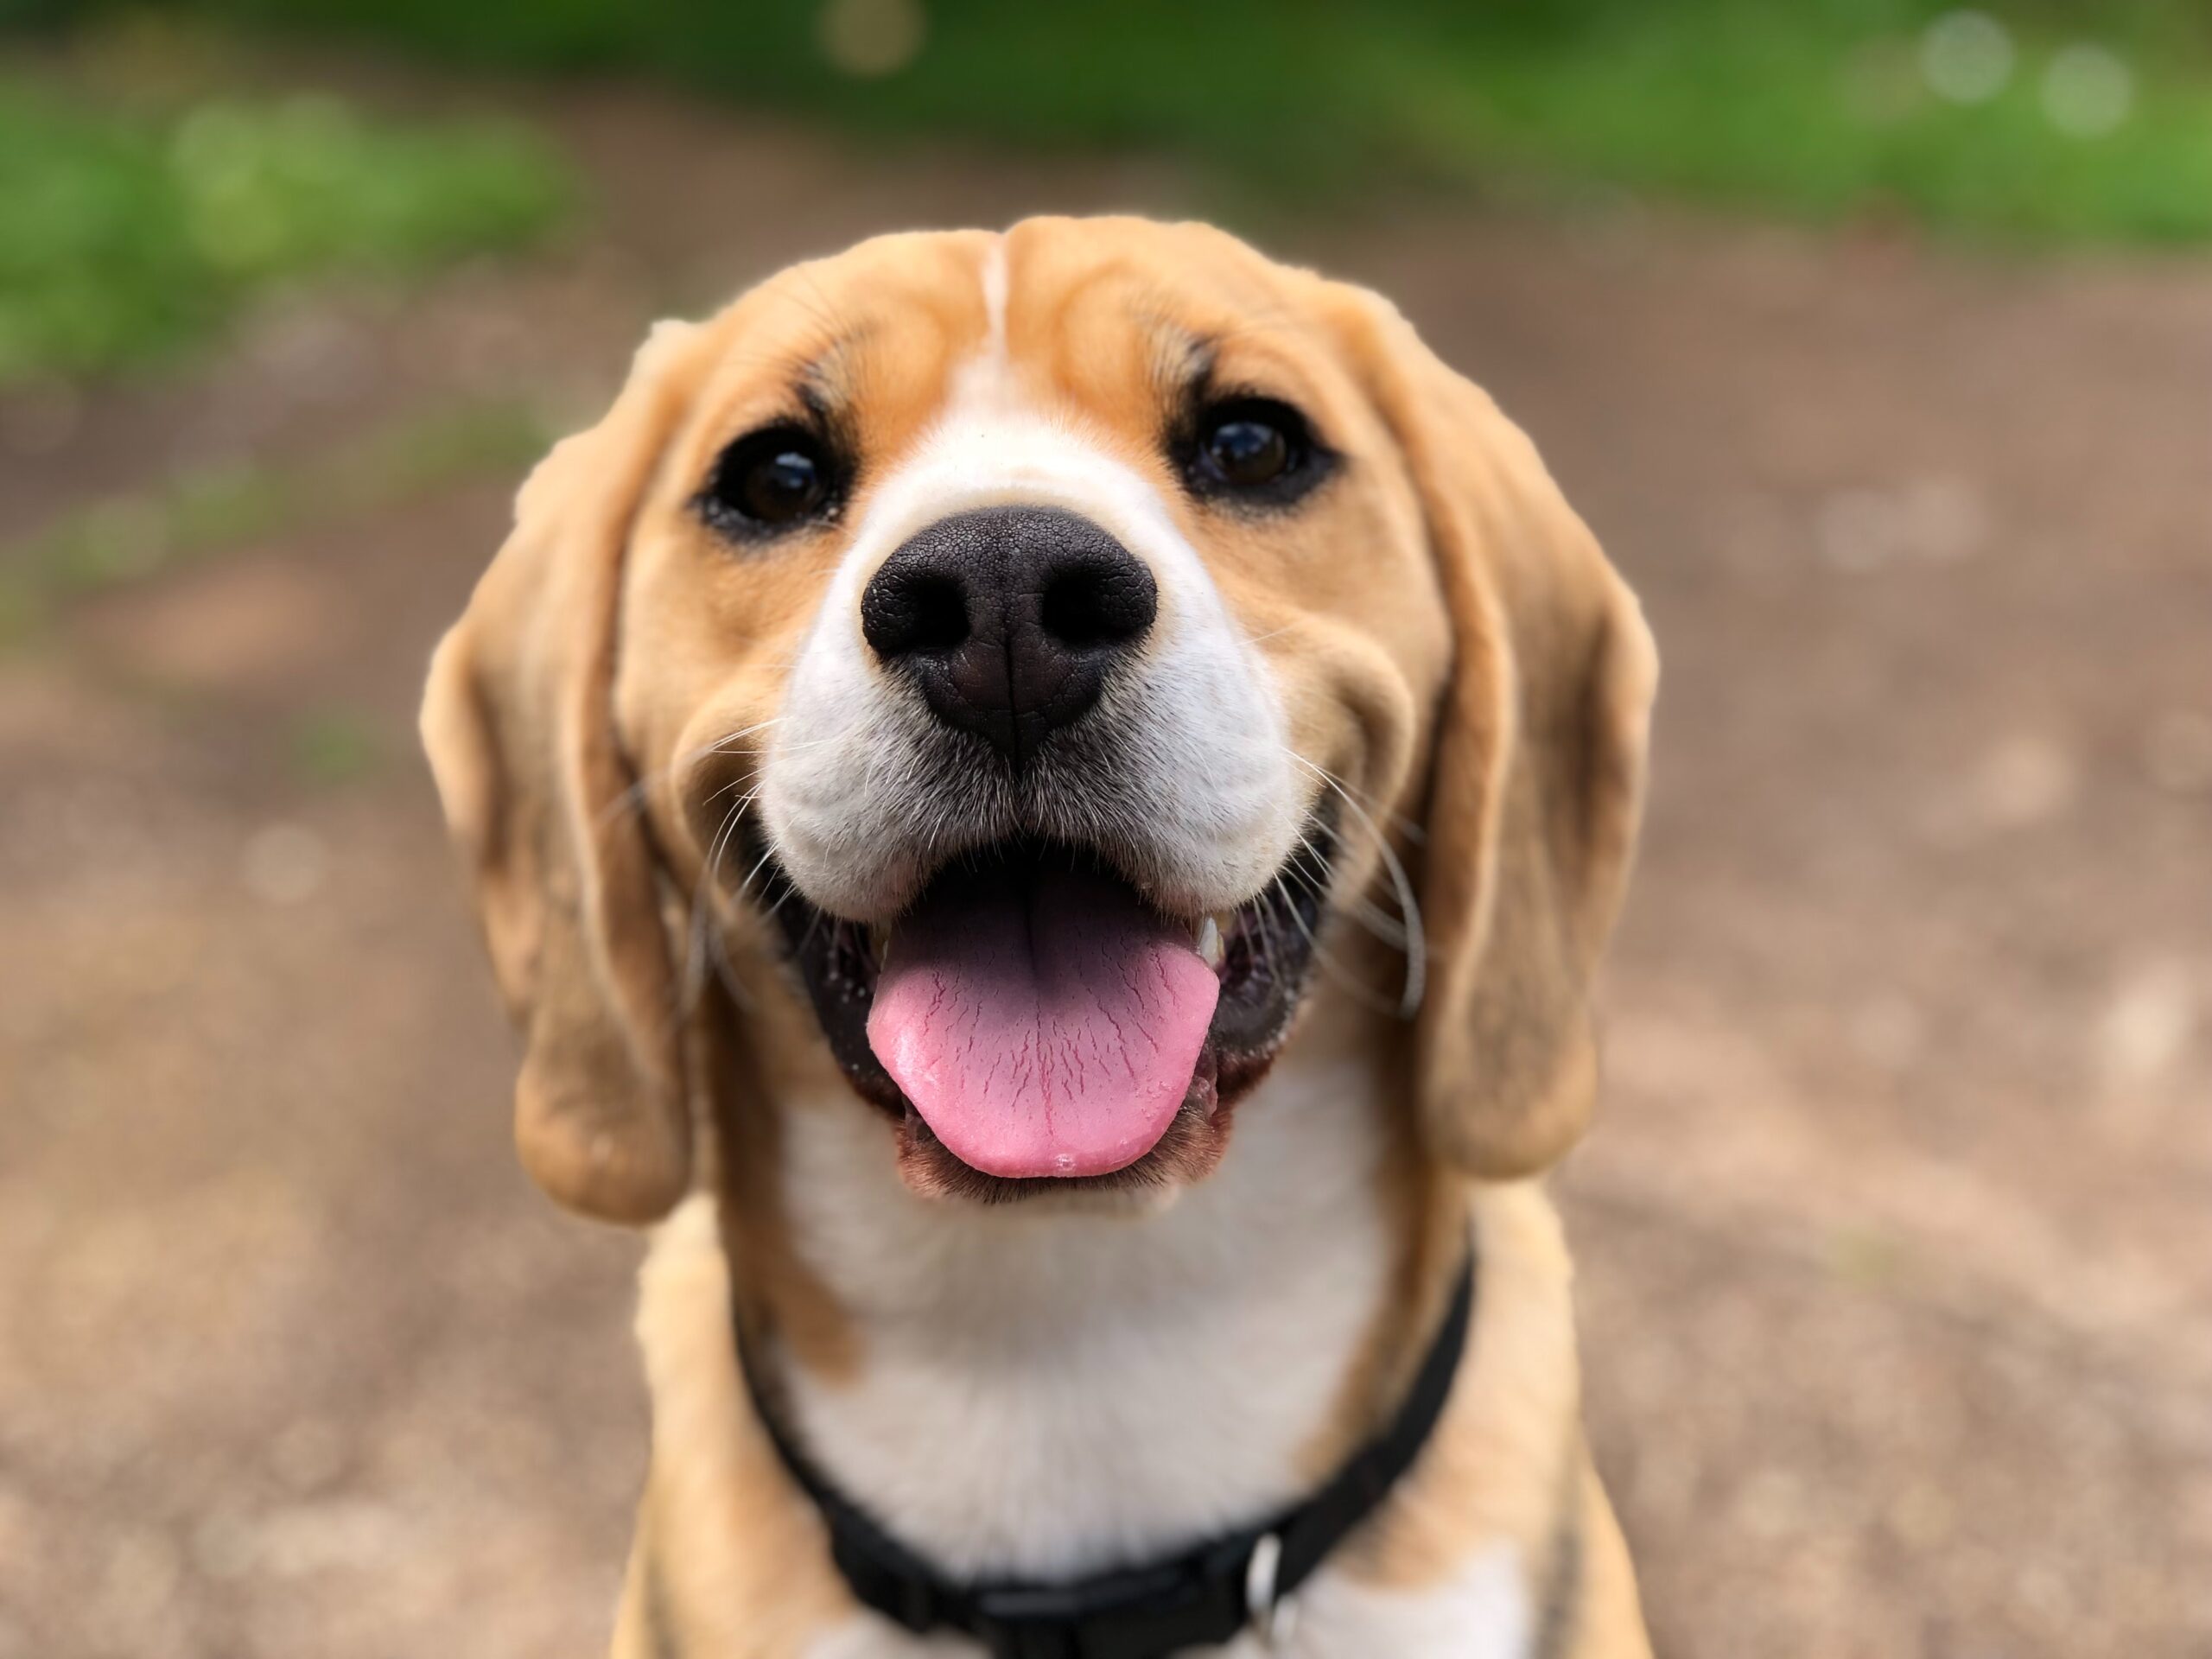 Hound dog looking at camera and appearing happy